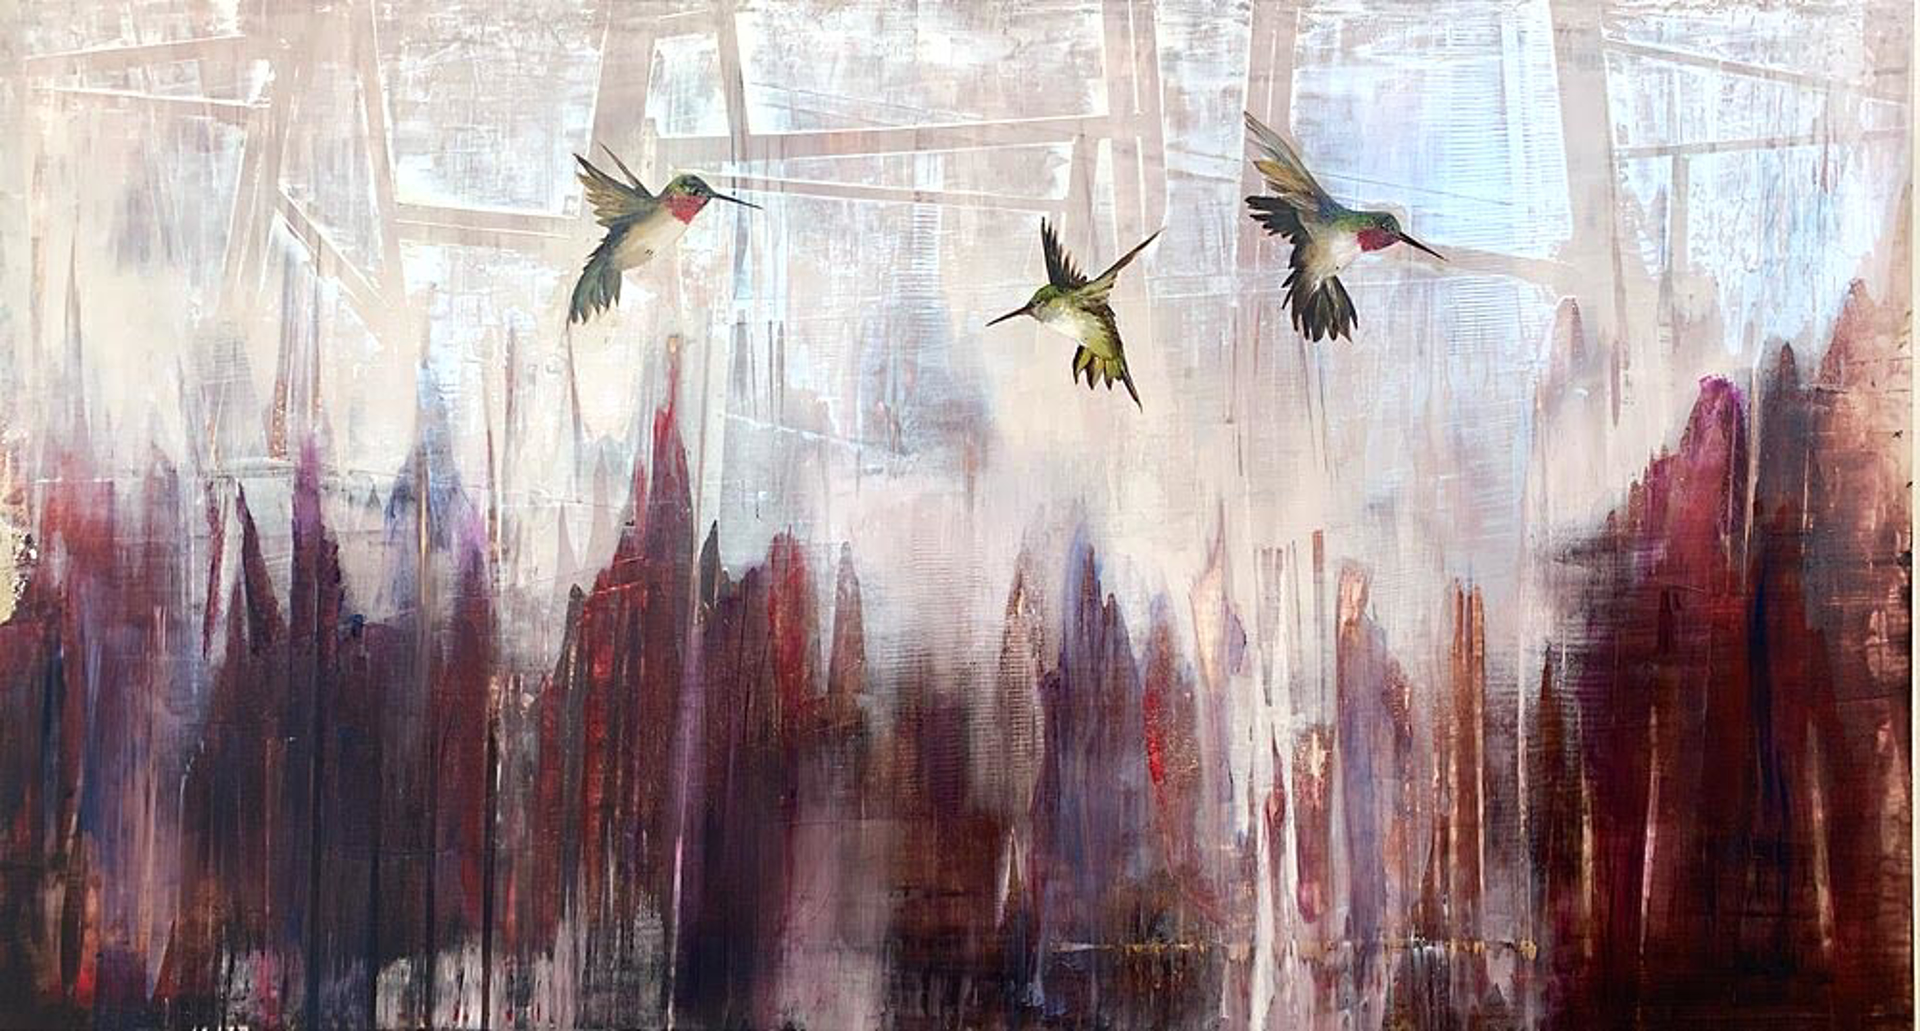 Contemporary Oil Painting Of Three Humming Birds In Flight Featuring A Light Colored Patterned Background That Fades To Maroon, By Jenna Von Benedikt